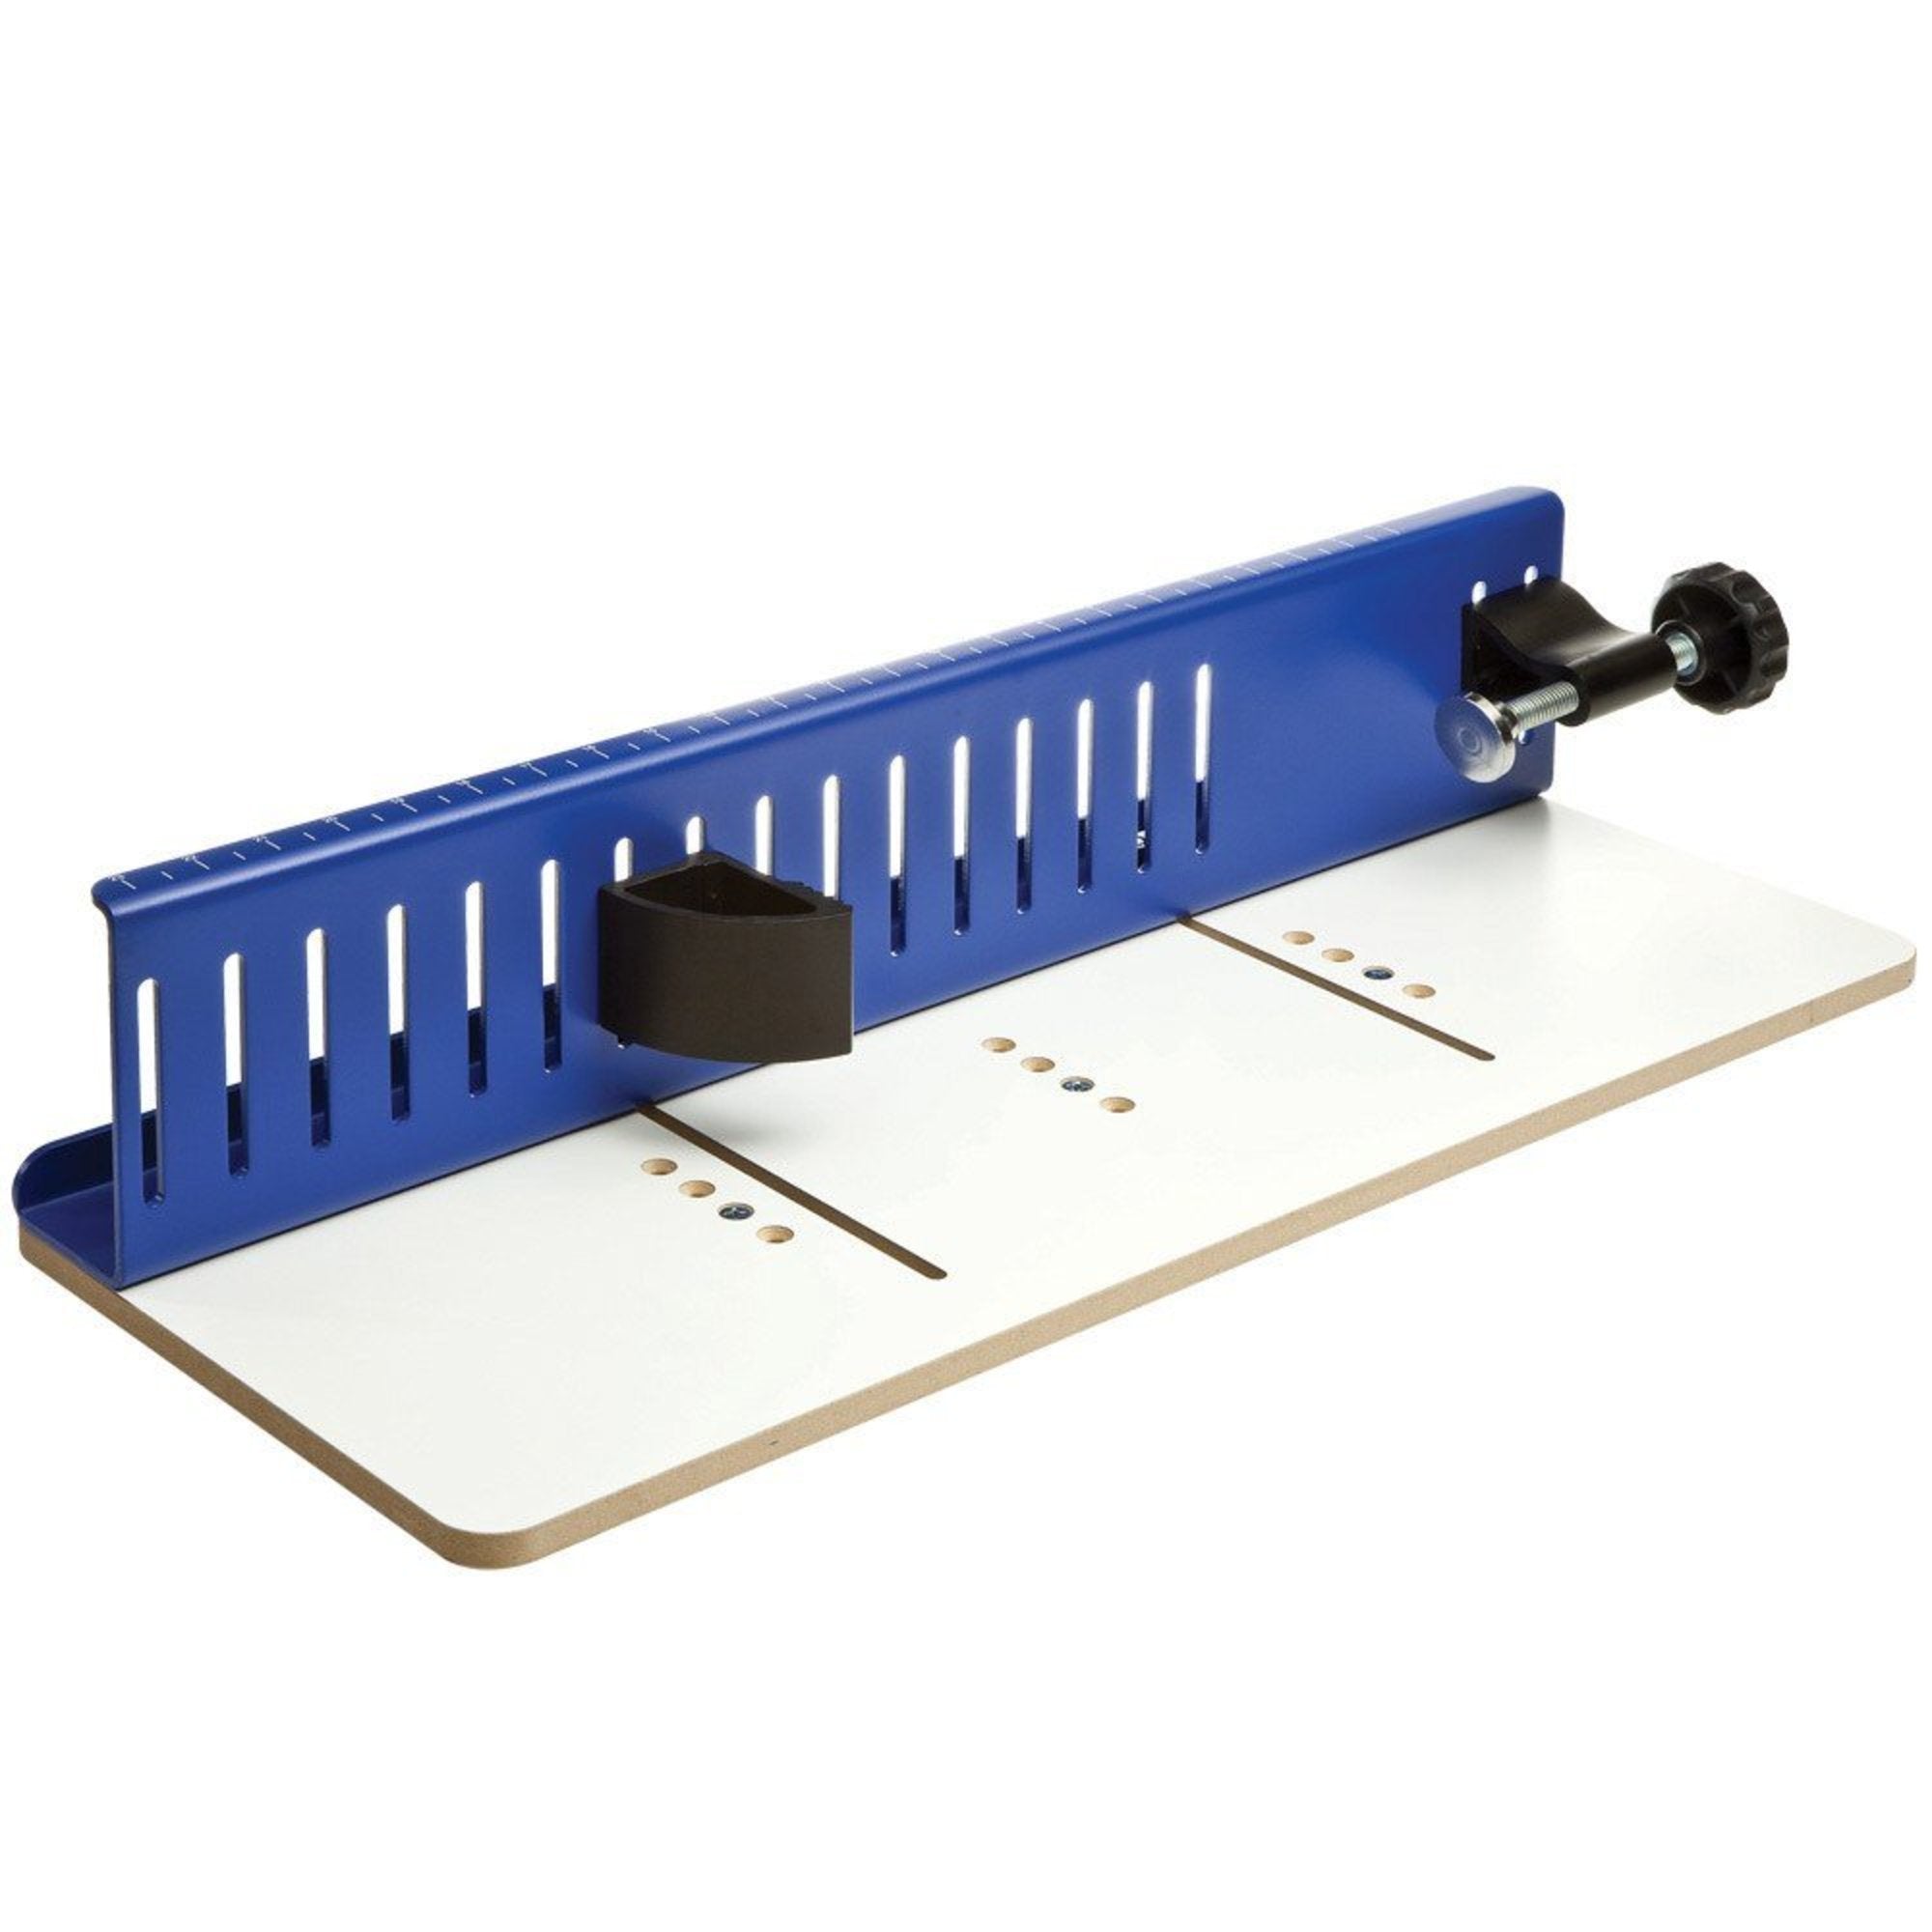 Shop for Carter at Prime Tools: Band Saw Accessories, Turning Accessories,  Turning Tools